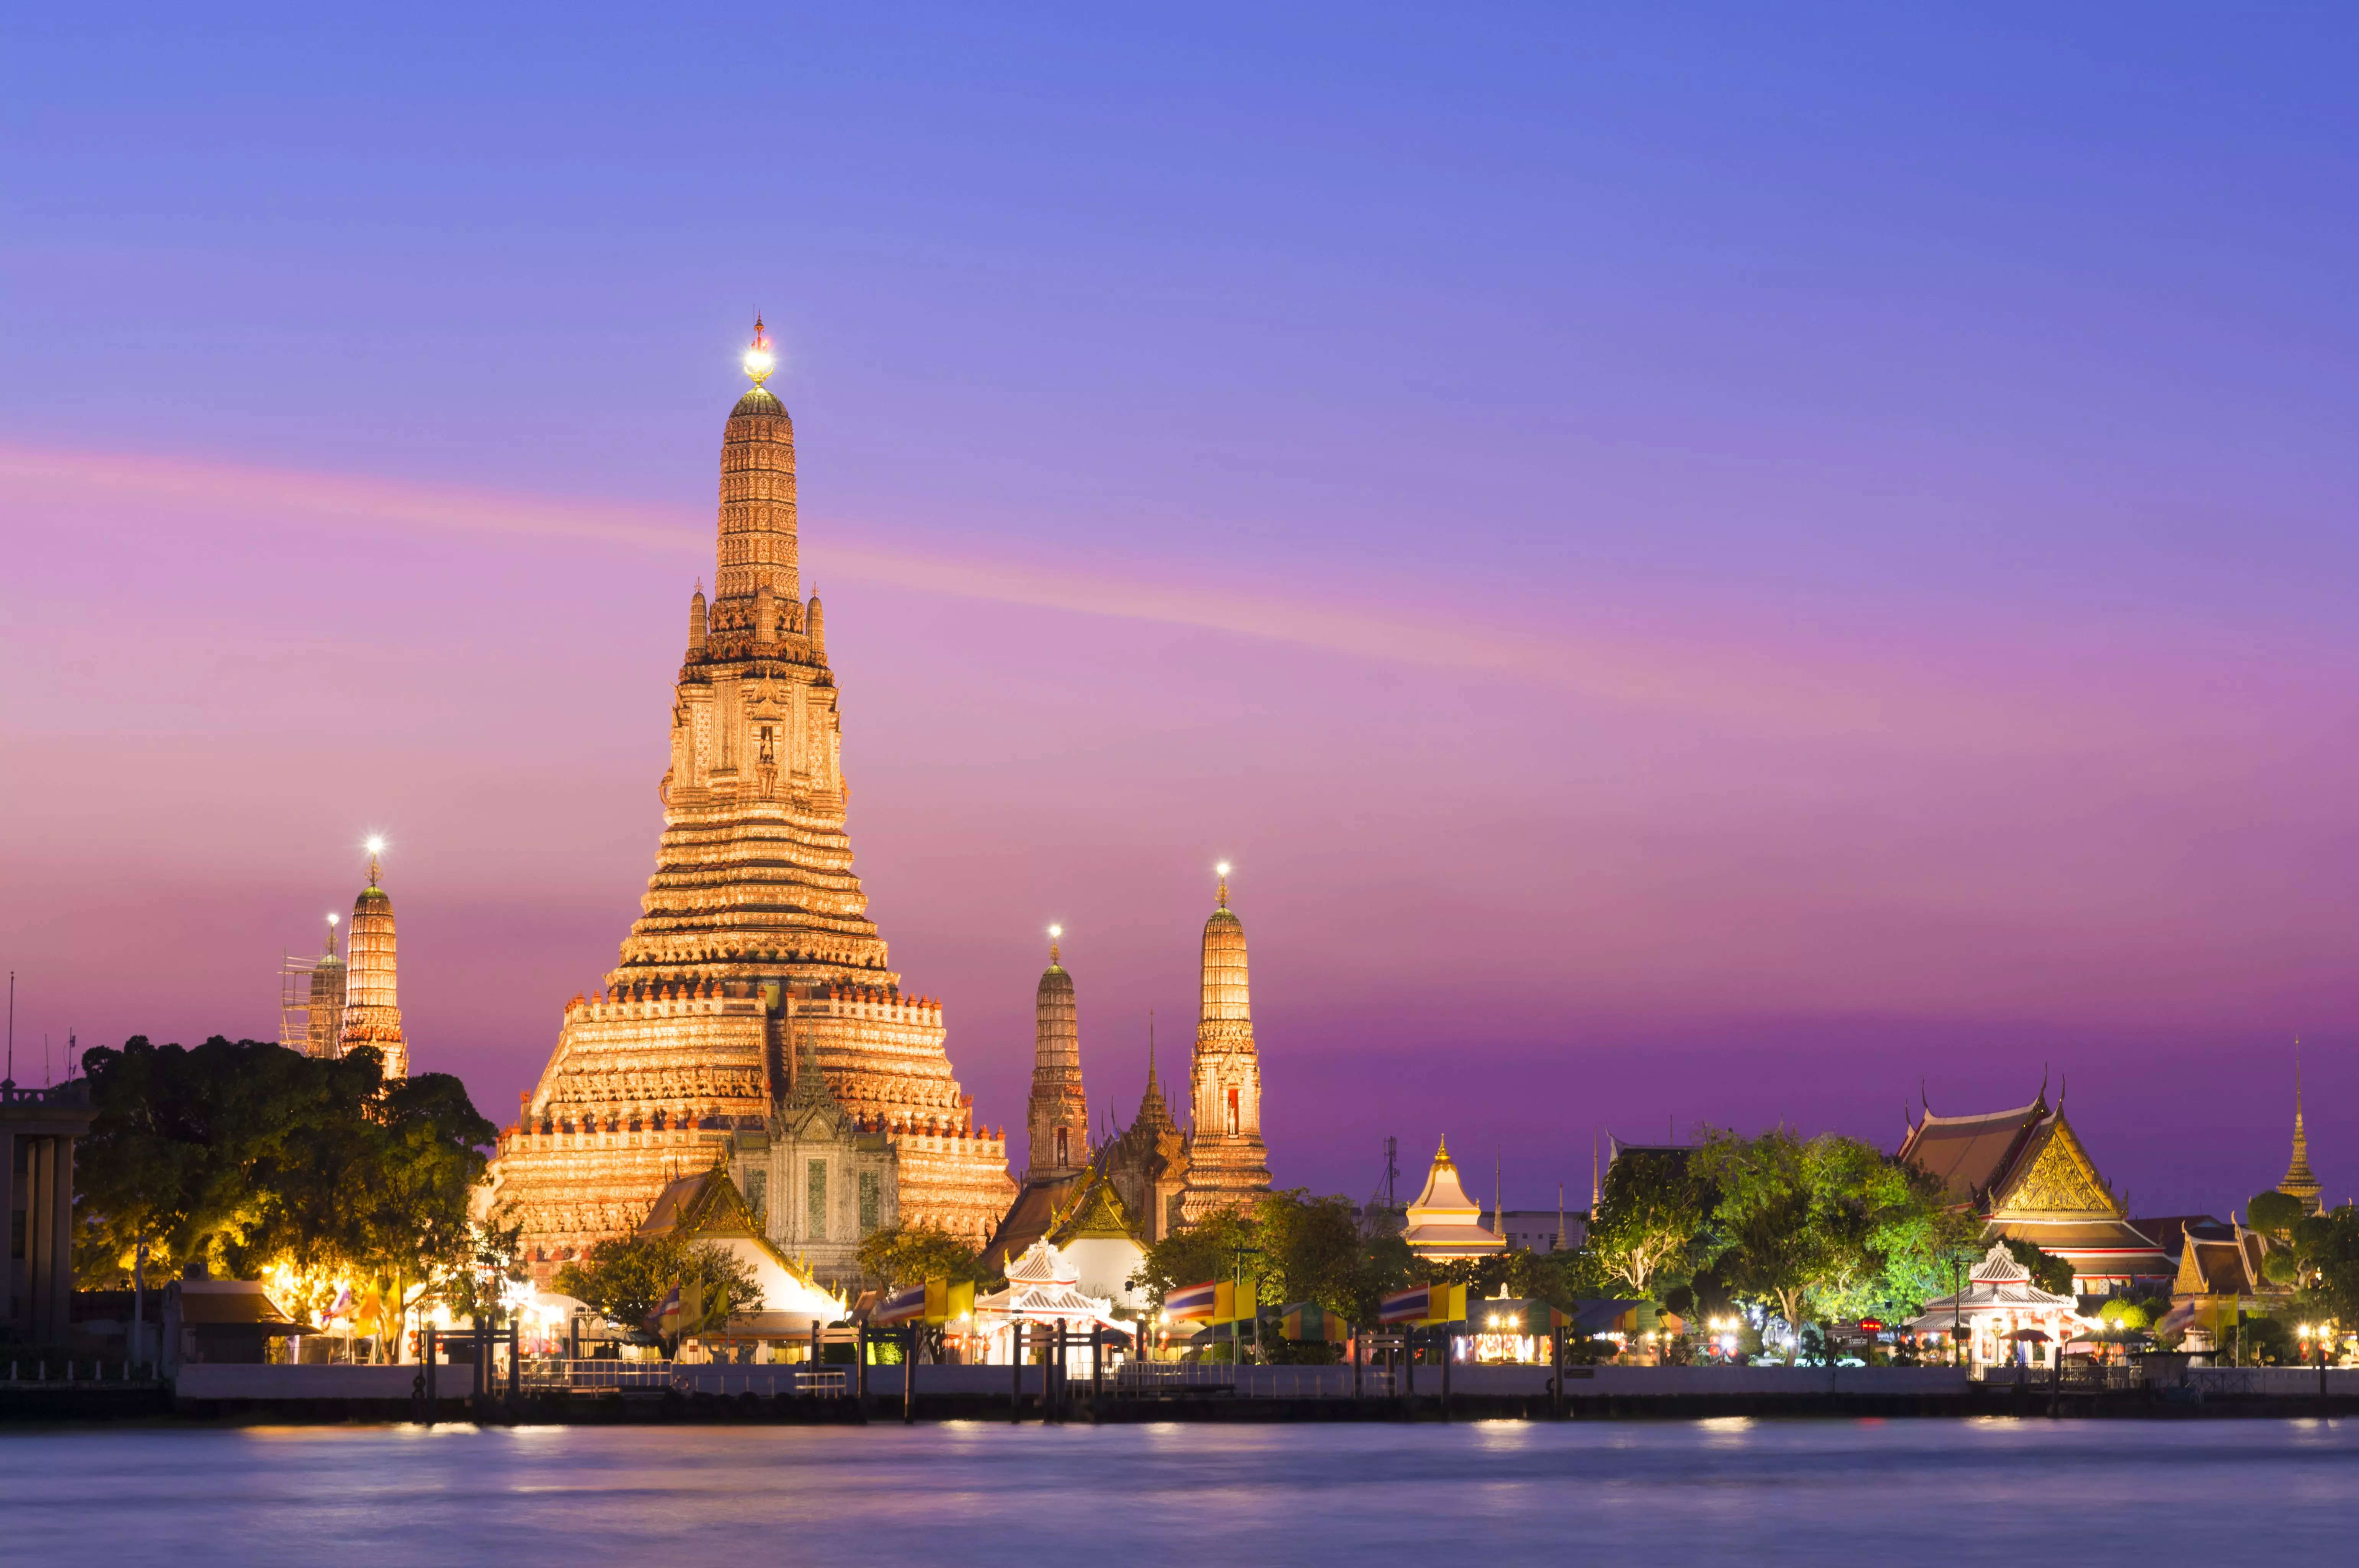 Tourism Authority of Thailand outlines marketing activities in support of air travel bubble agreement